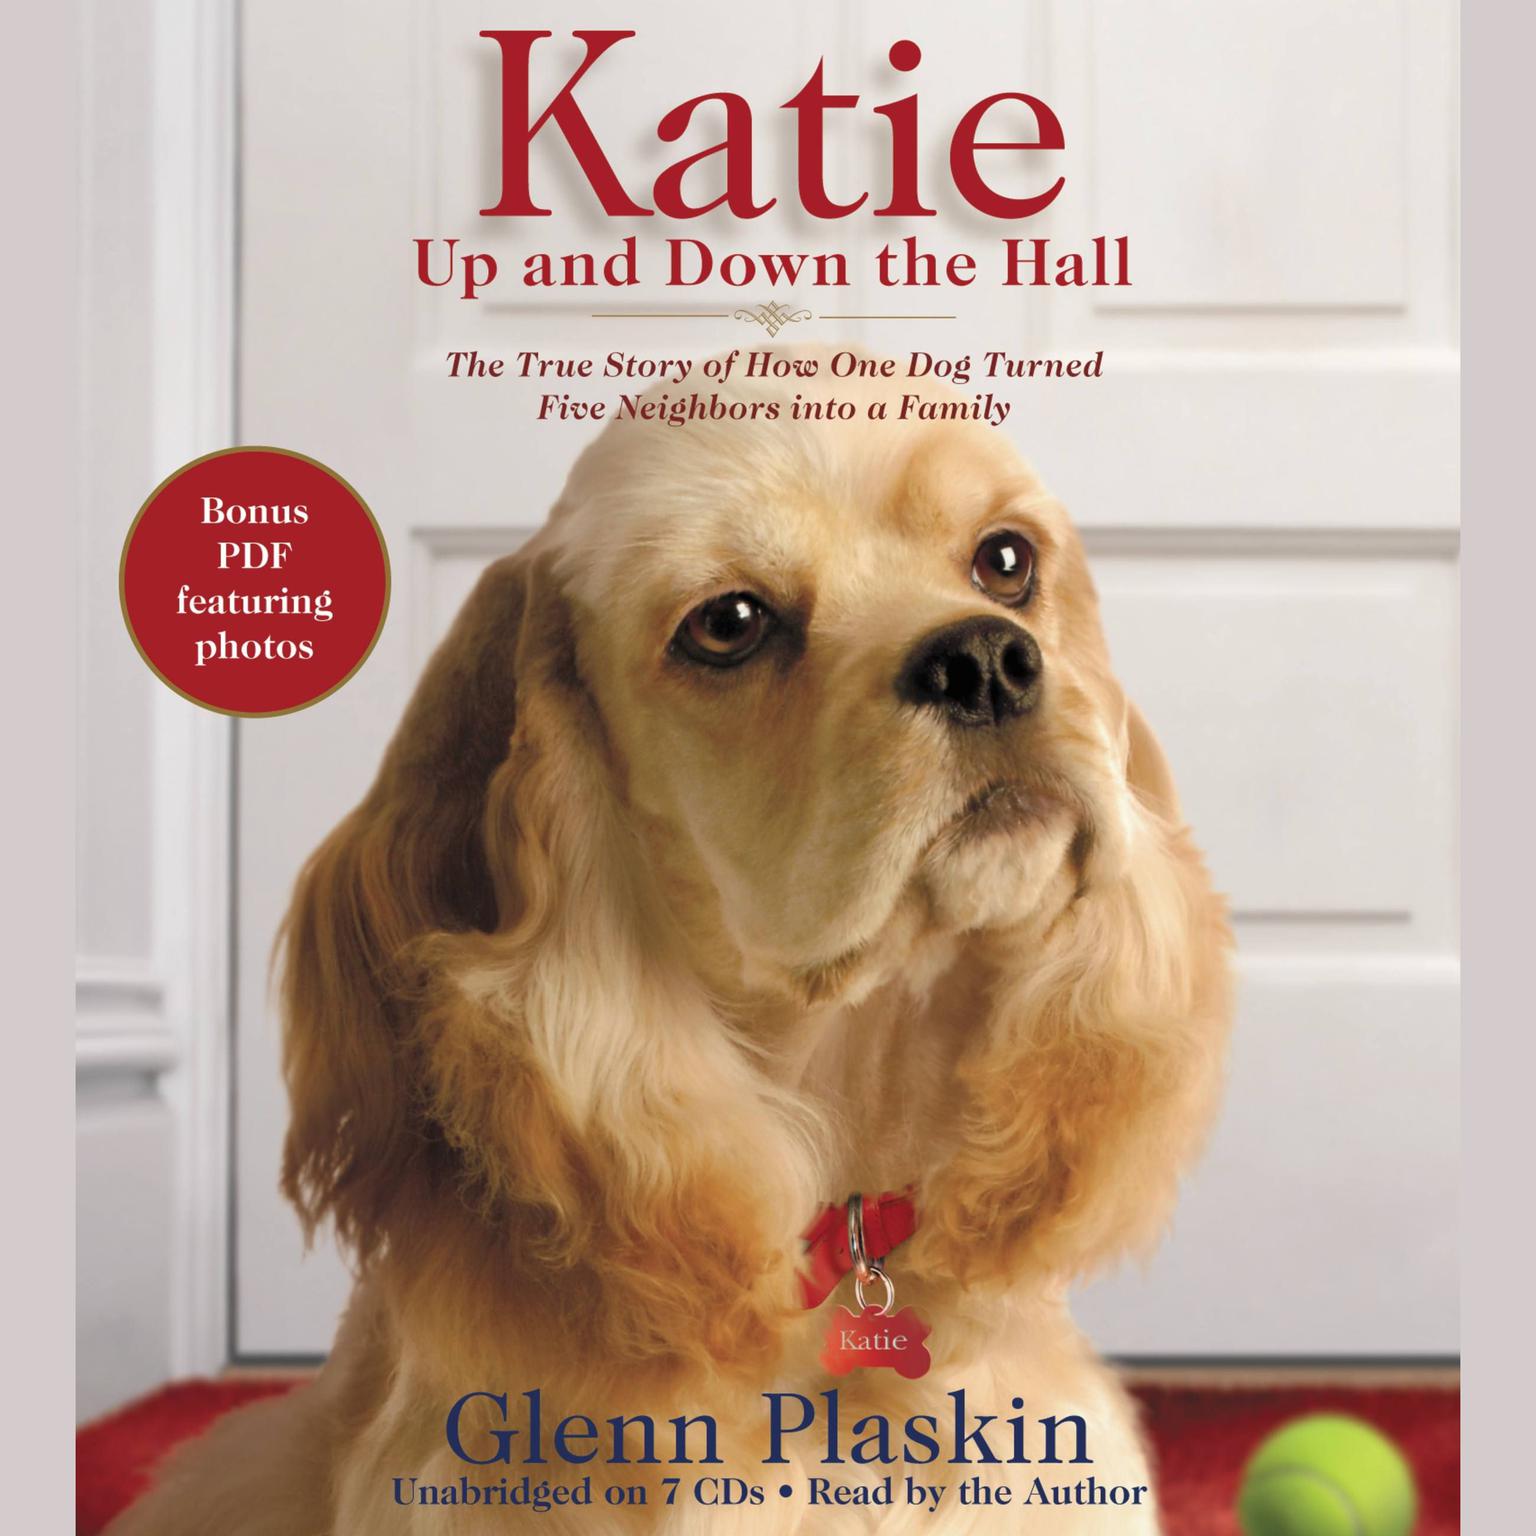 Katie Up and Down the Hall: The True Story of How One Dog Turned Five Neighbors into a Family Audiobook, by Glenn Plaskin